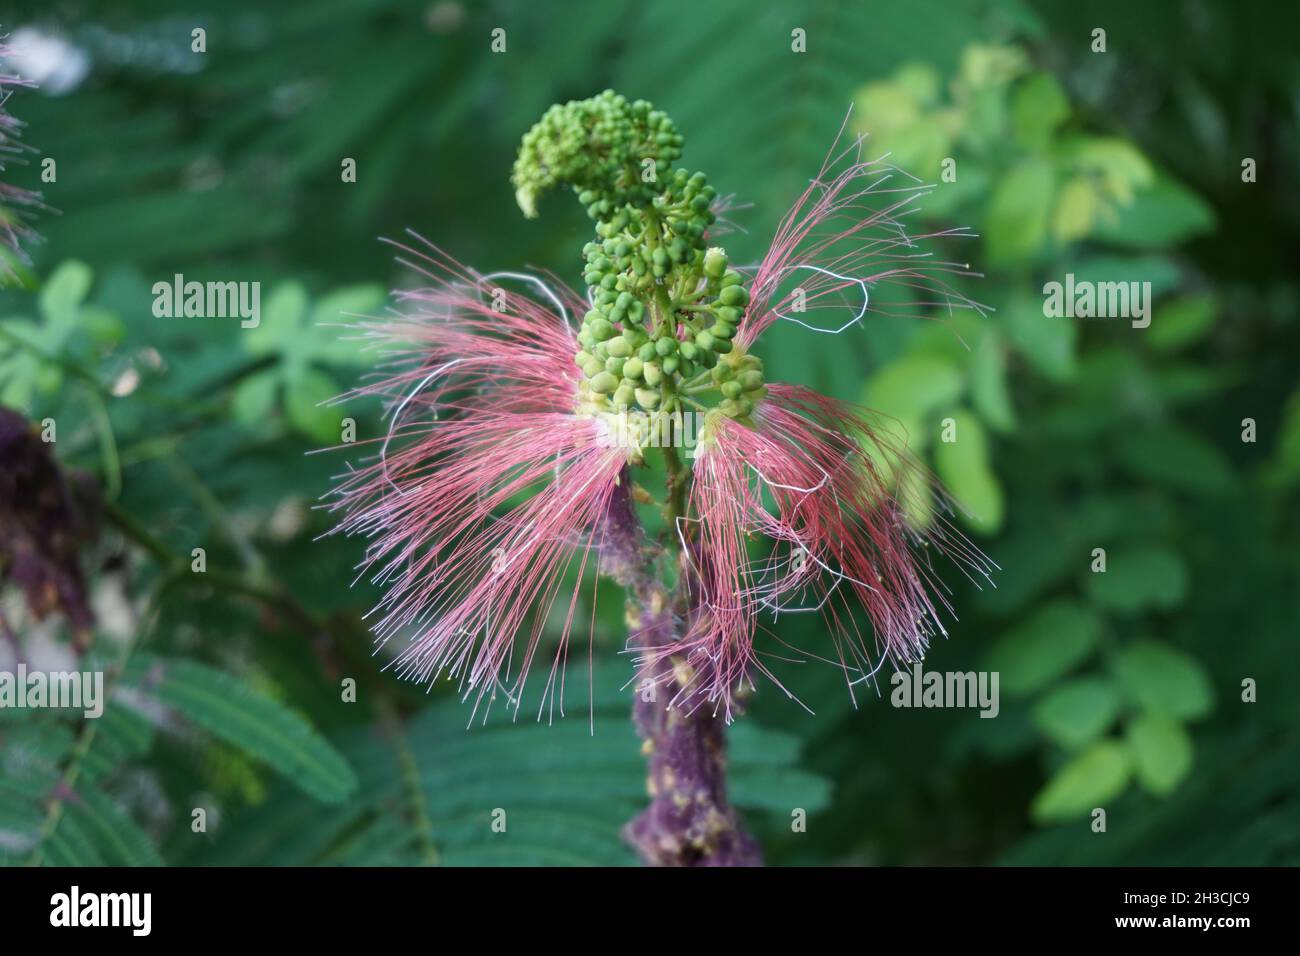 Persian silk tree flower with a natural background Stock Photo